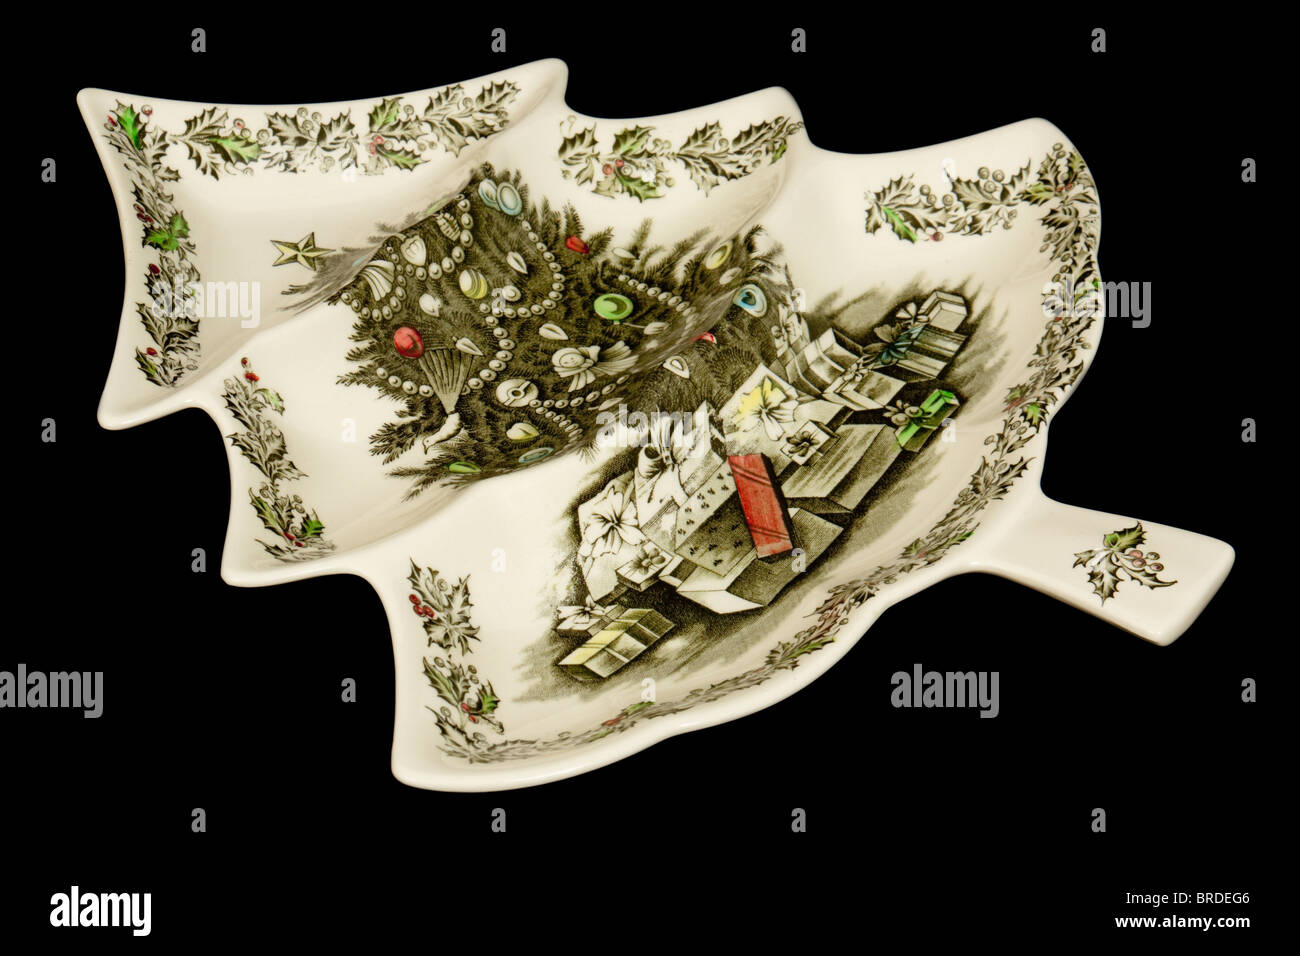 Ceramic Christmas tree shaped serving dish by Johnson Brothers Stock Photo